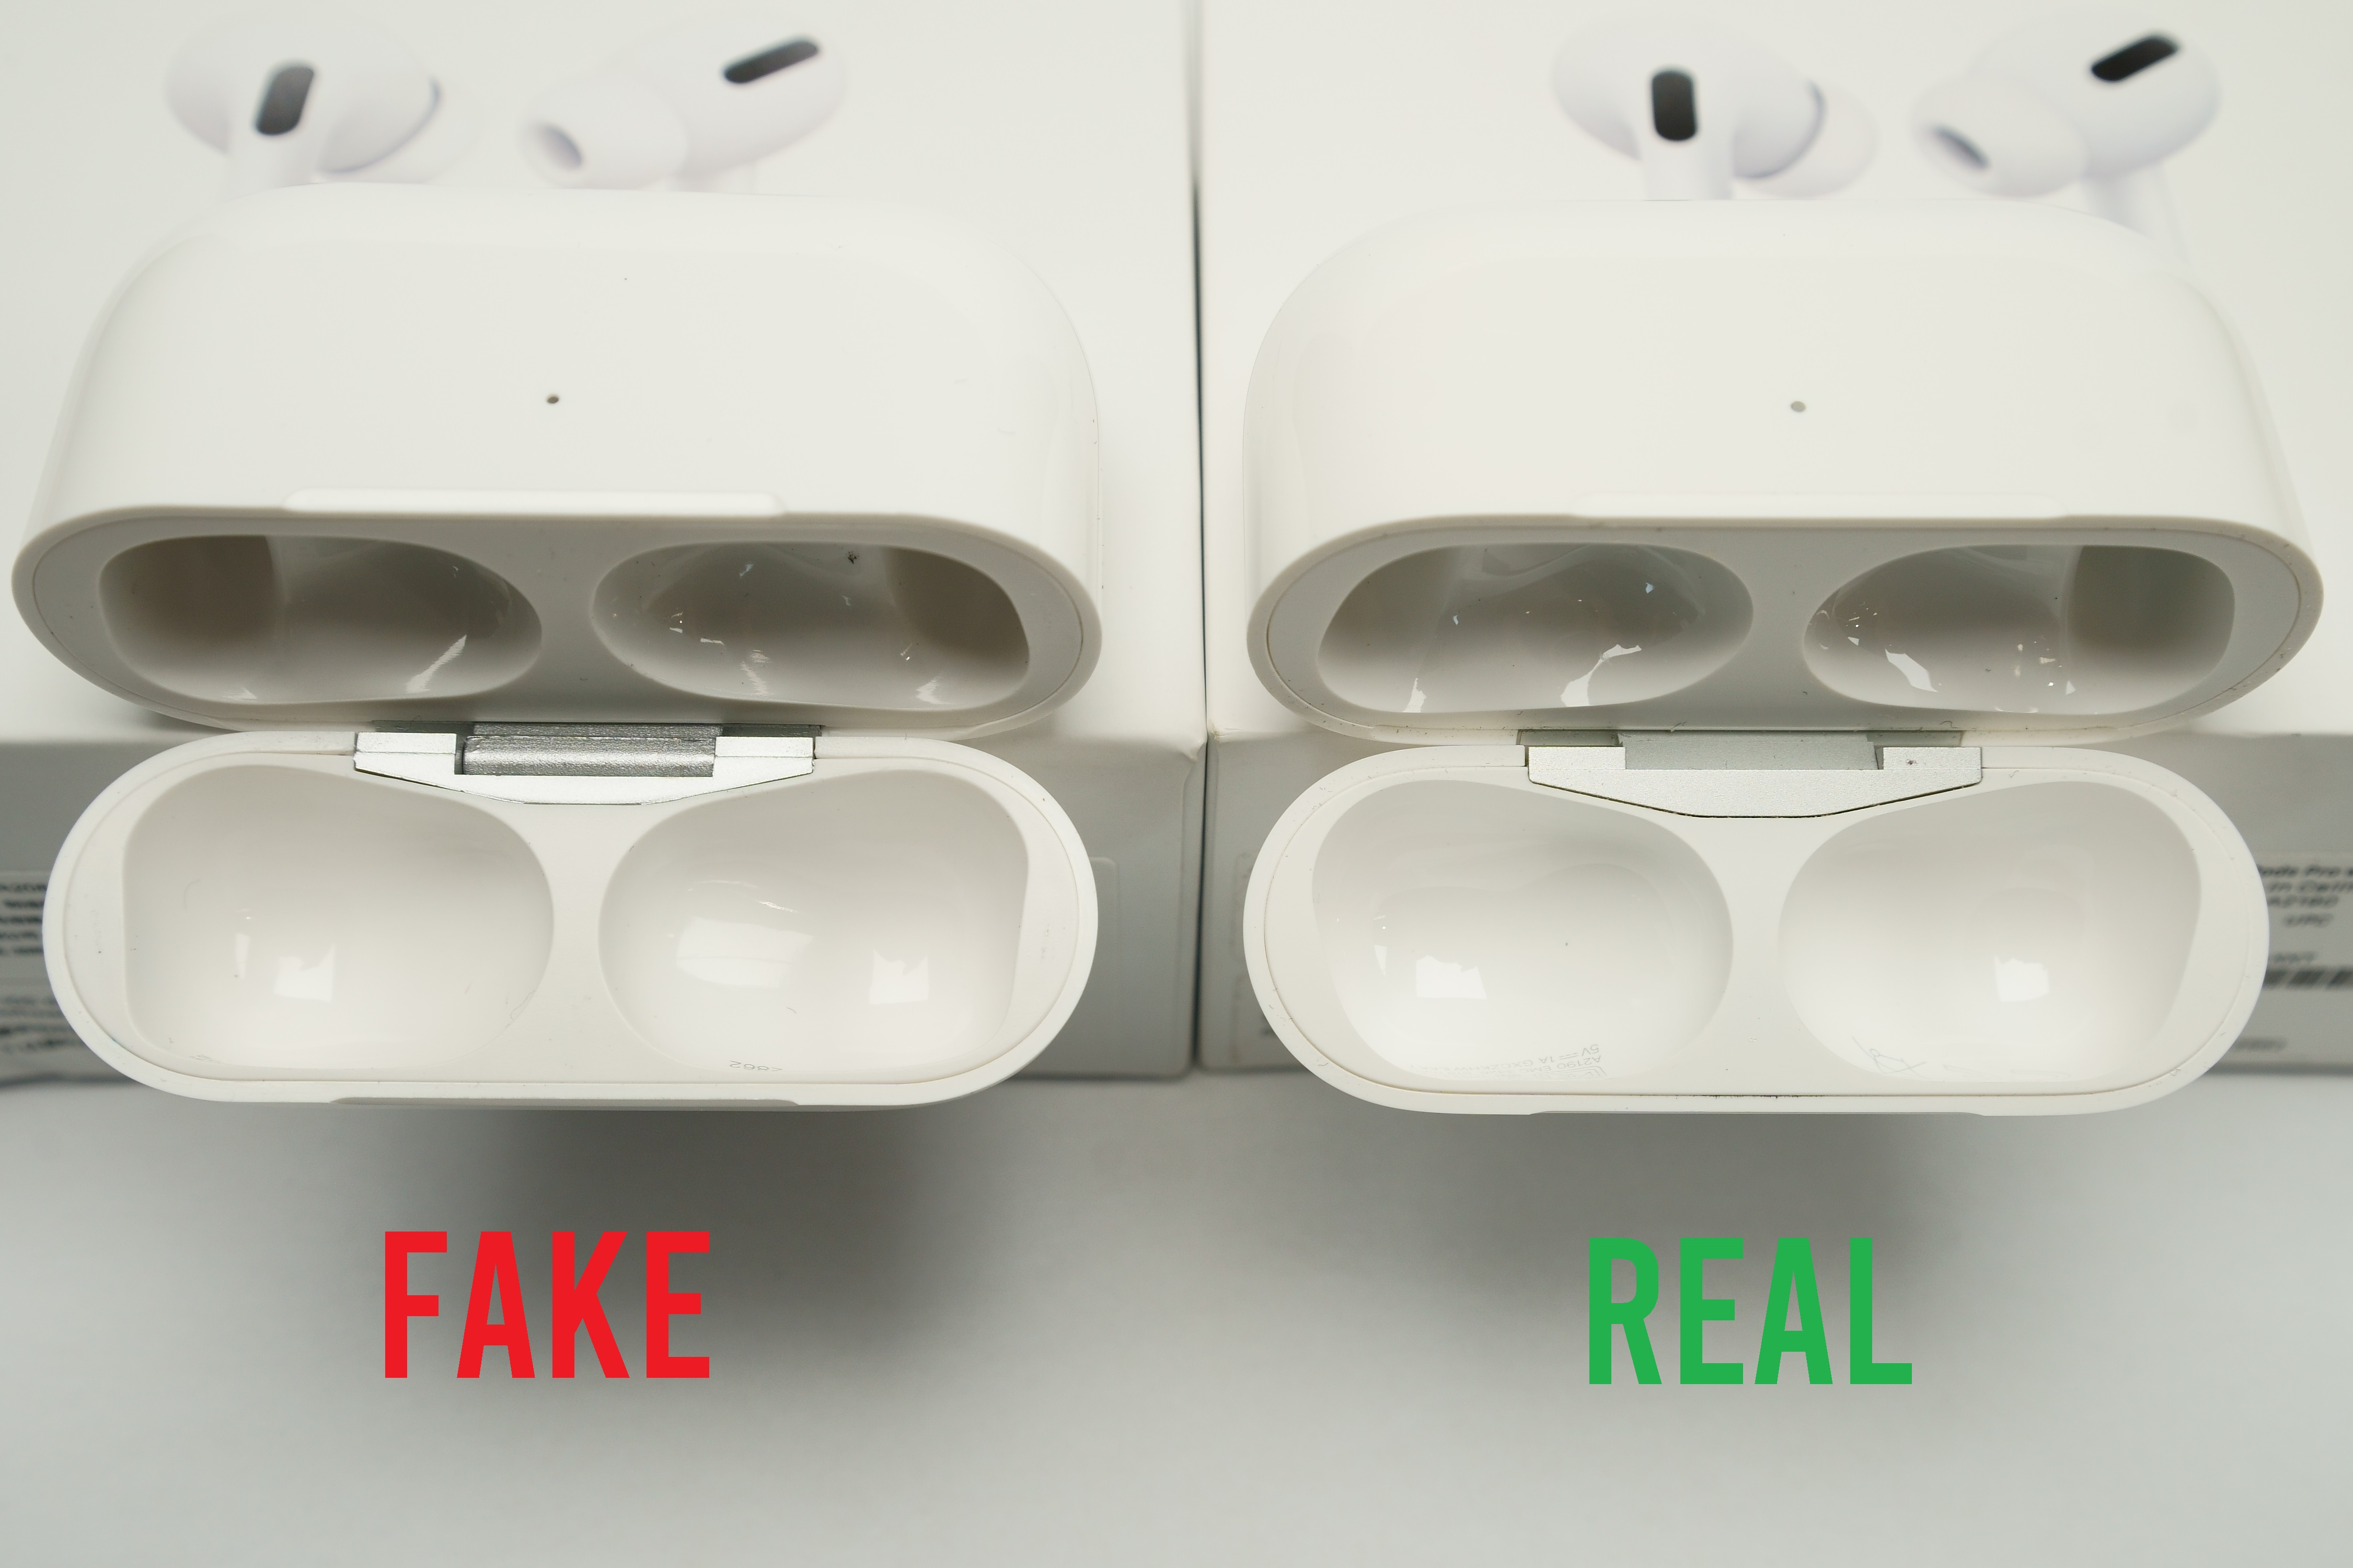 sewing machine second option Spotting Counterfeit Airpods Pro - Real vs Fake Comparison - HYBRID HARDWARE